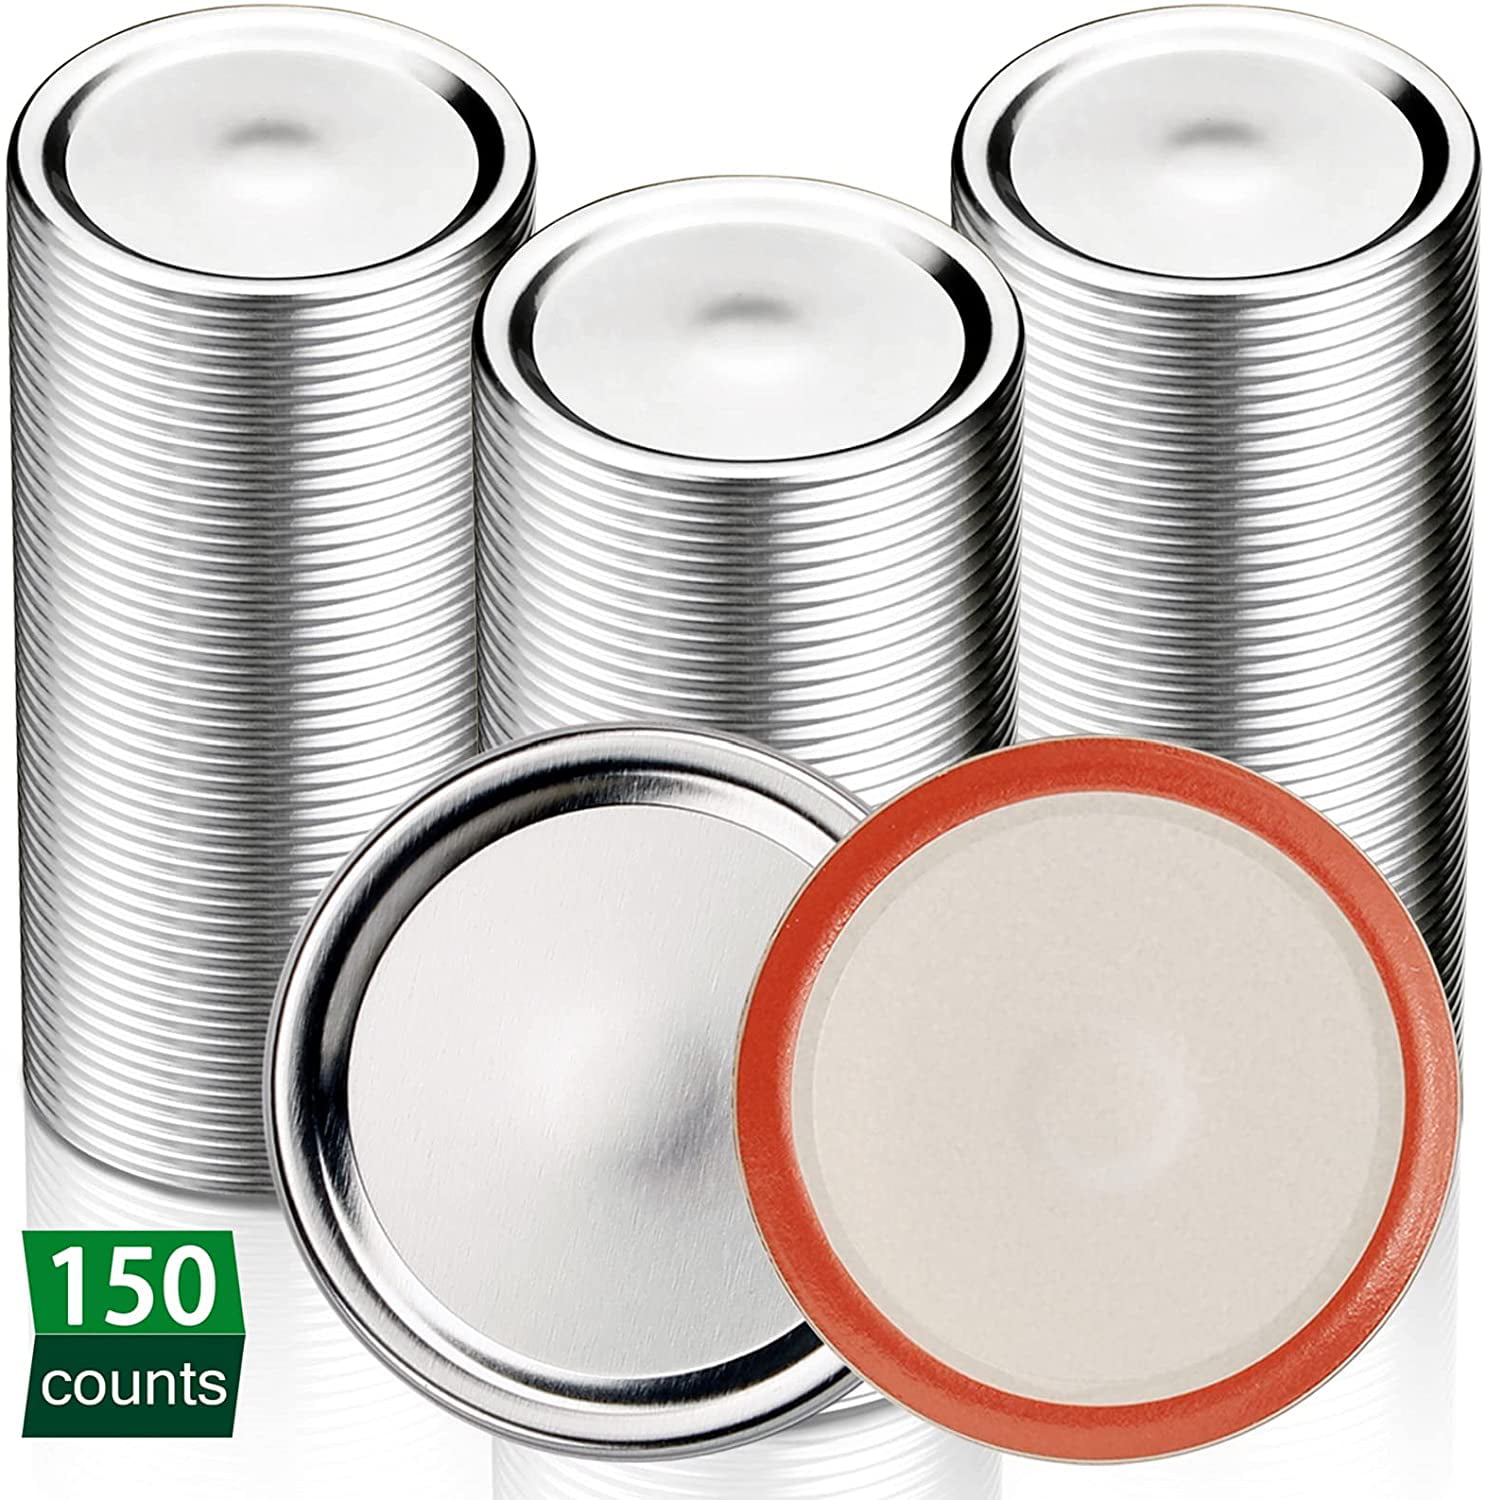 150 Counts 2.75inch Regular Mouth Jars Canning Lids for Mason Ball Canning Lids for Mason Jars Kerr Jars 